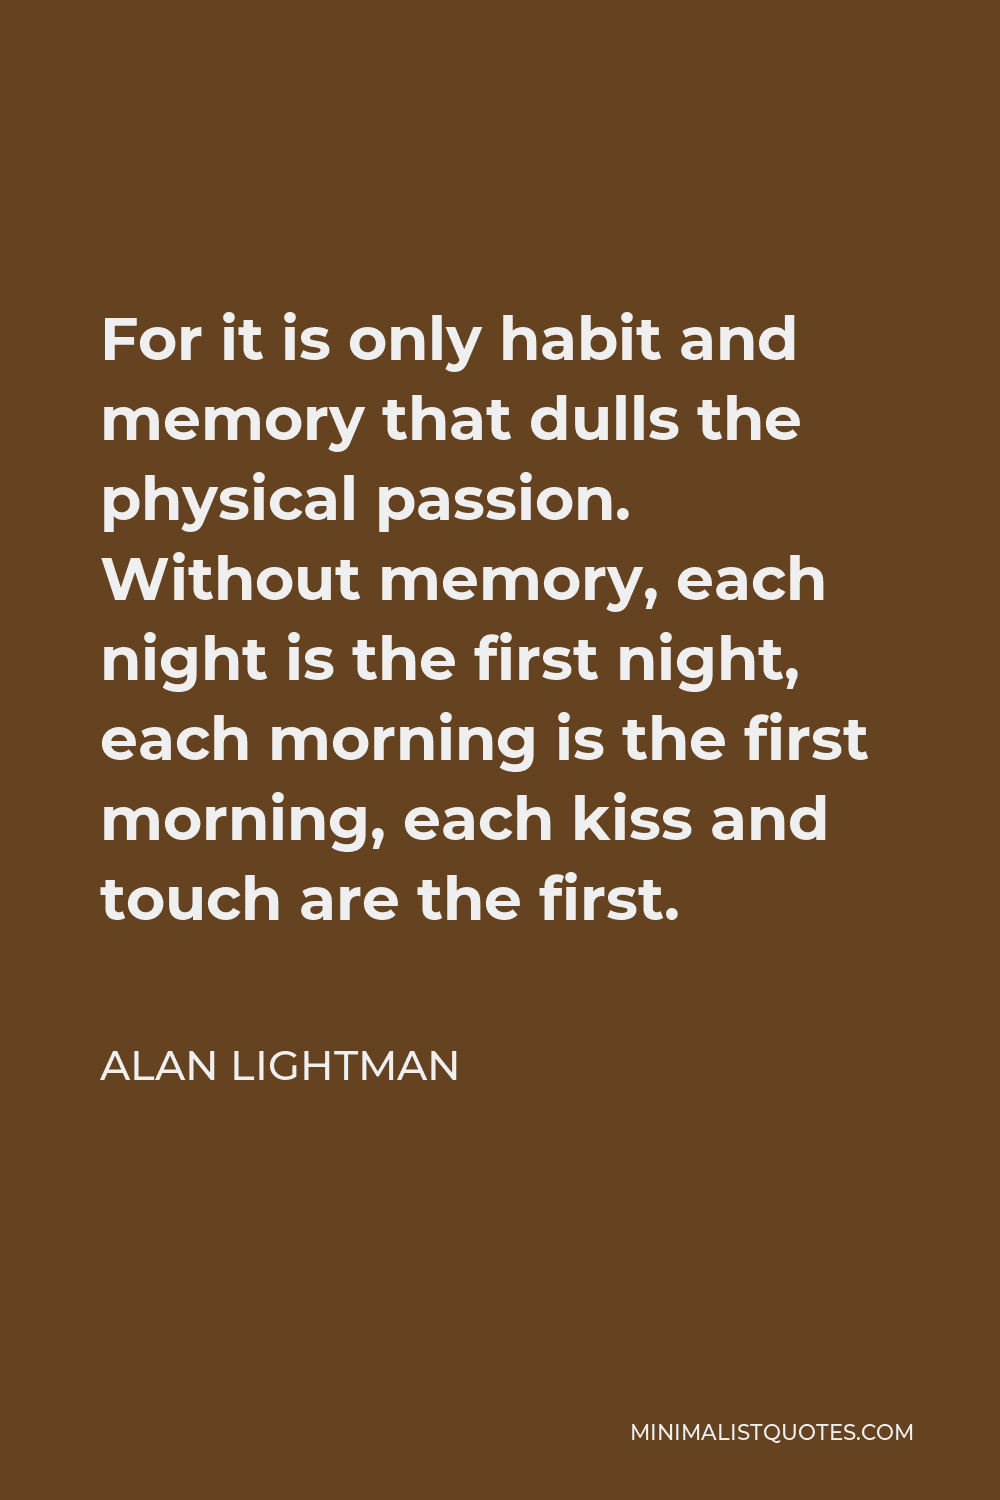 Alan Lightman Quote - For it is only habit and memory that dulls the physical passion. Without memory, each night is the first night, each morning is the first morning, each kiss and touch are the first.